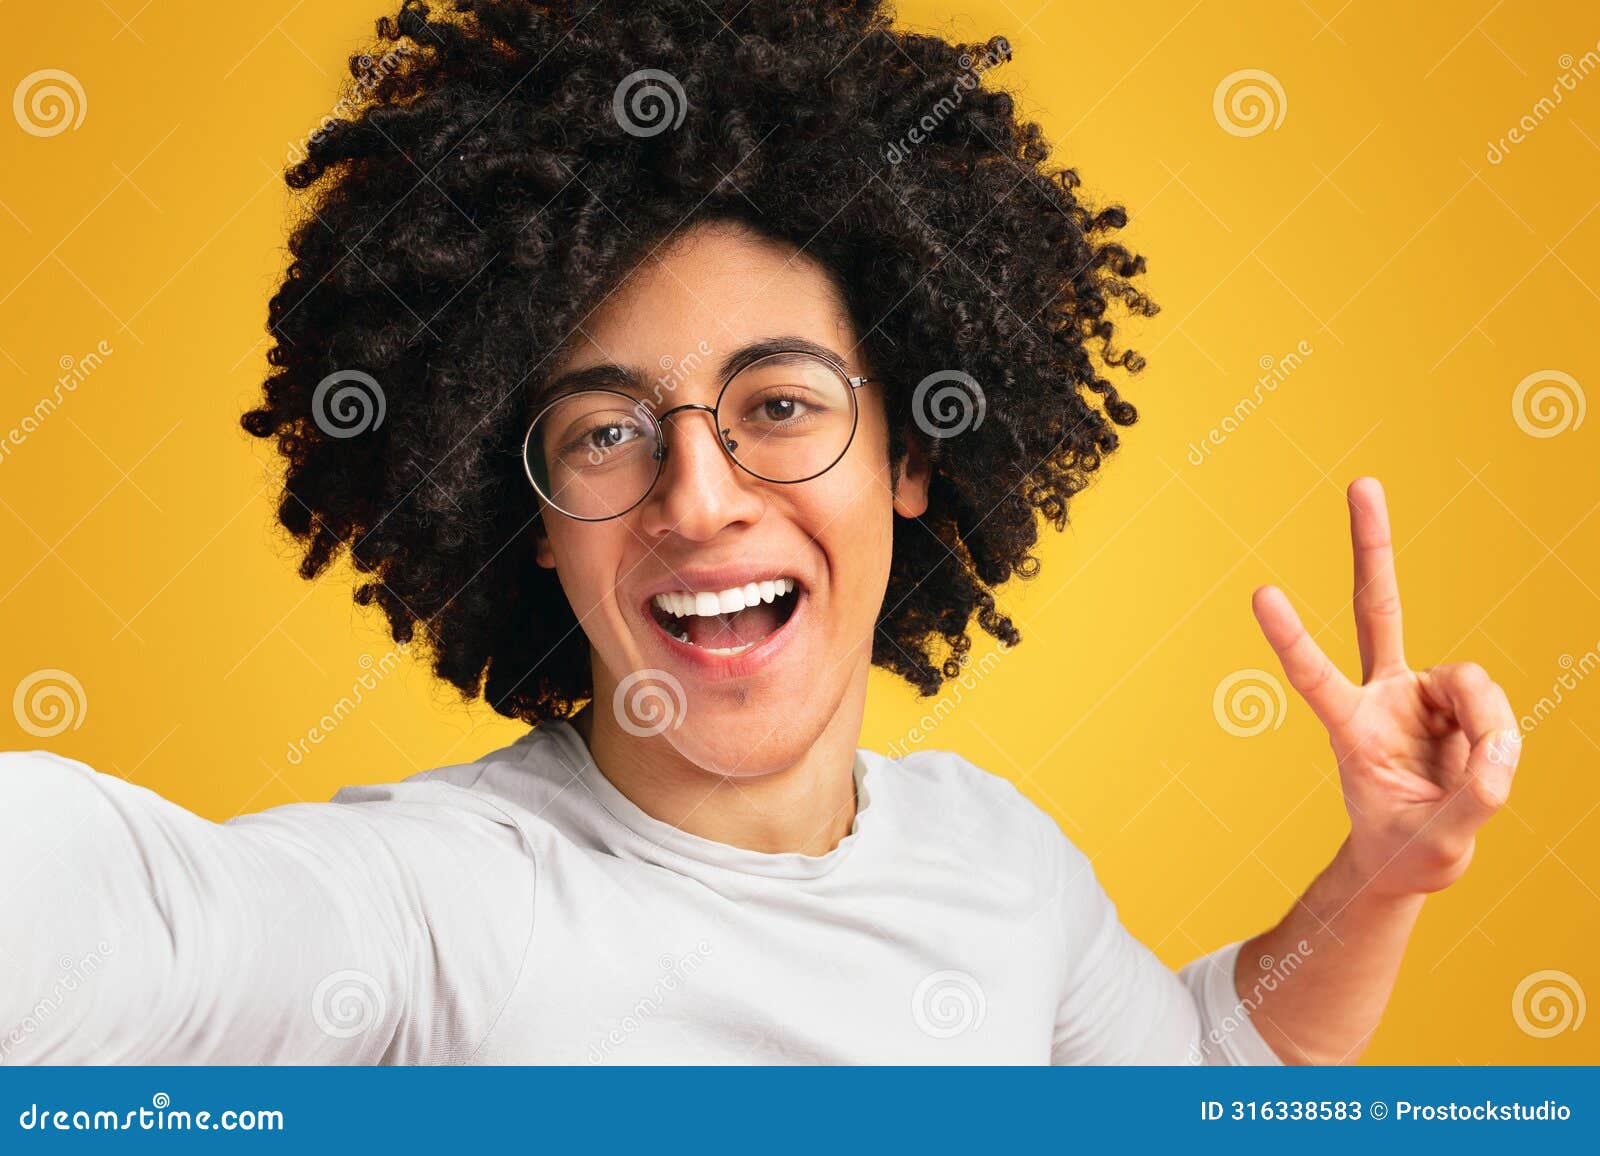 cheerful african american guy gesturing v sign on camera